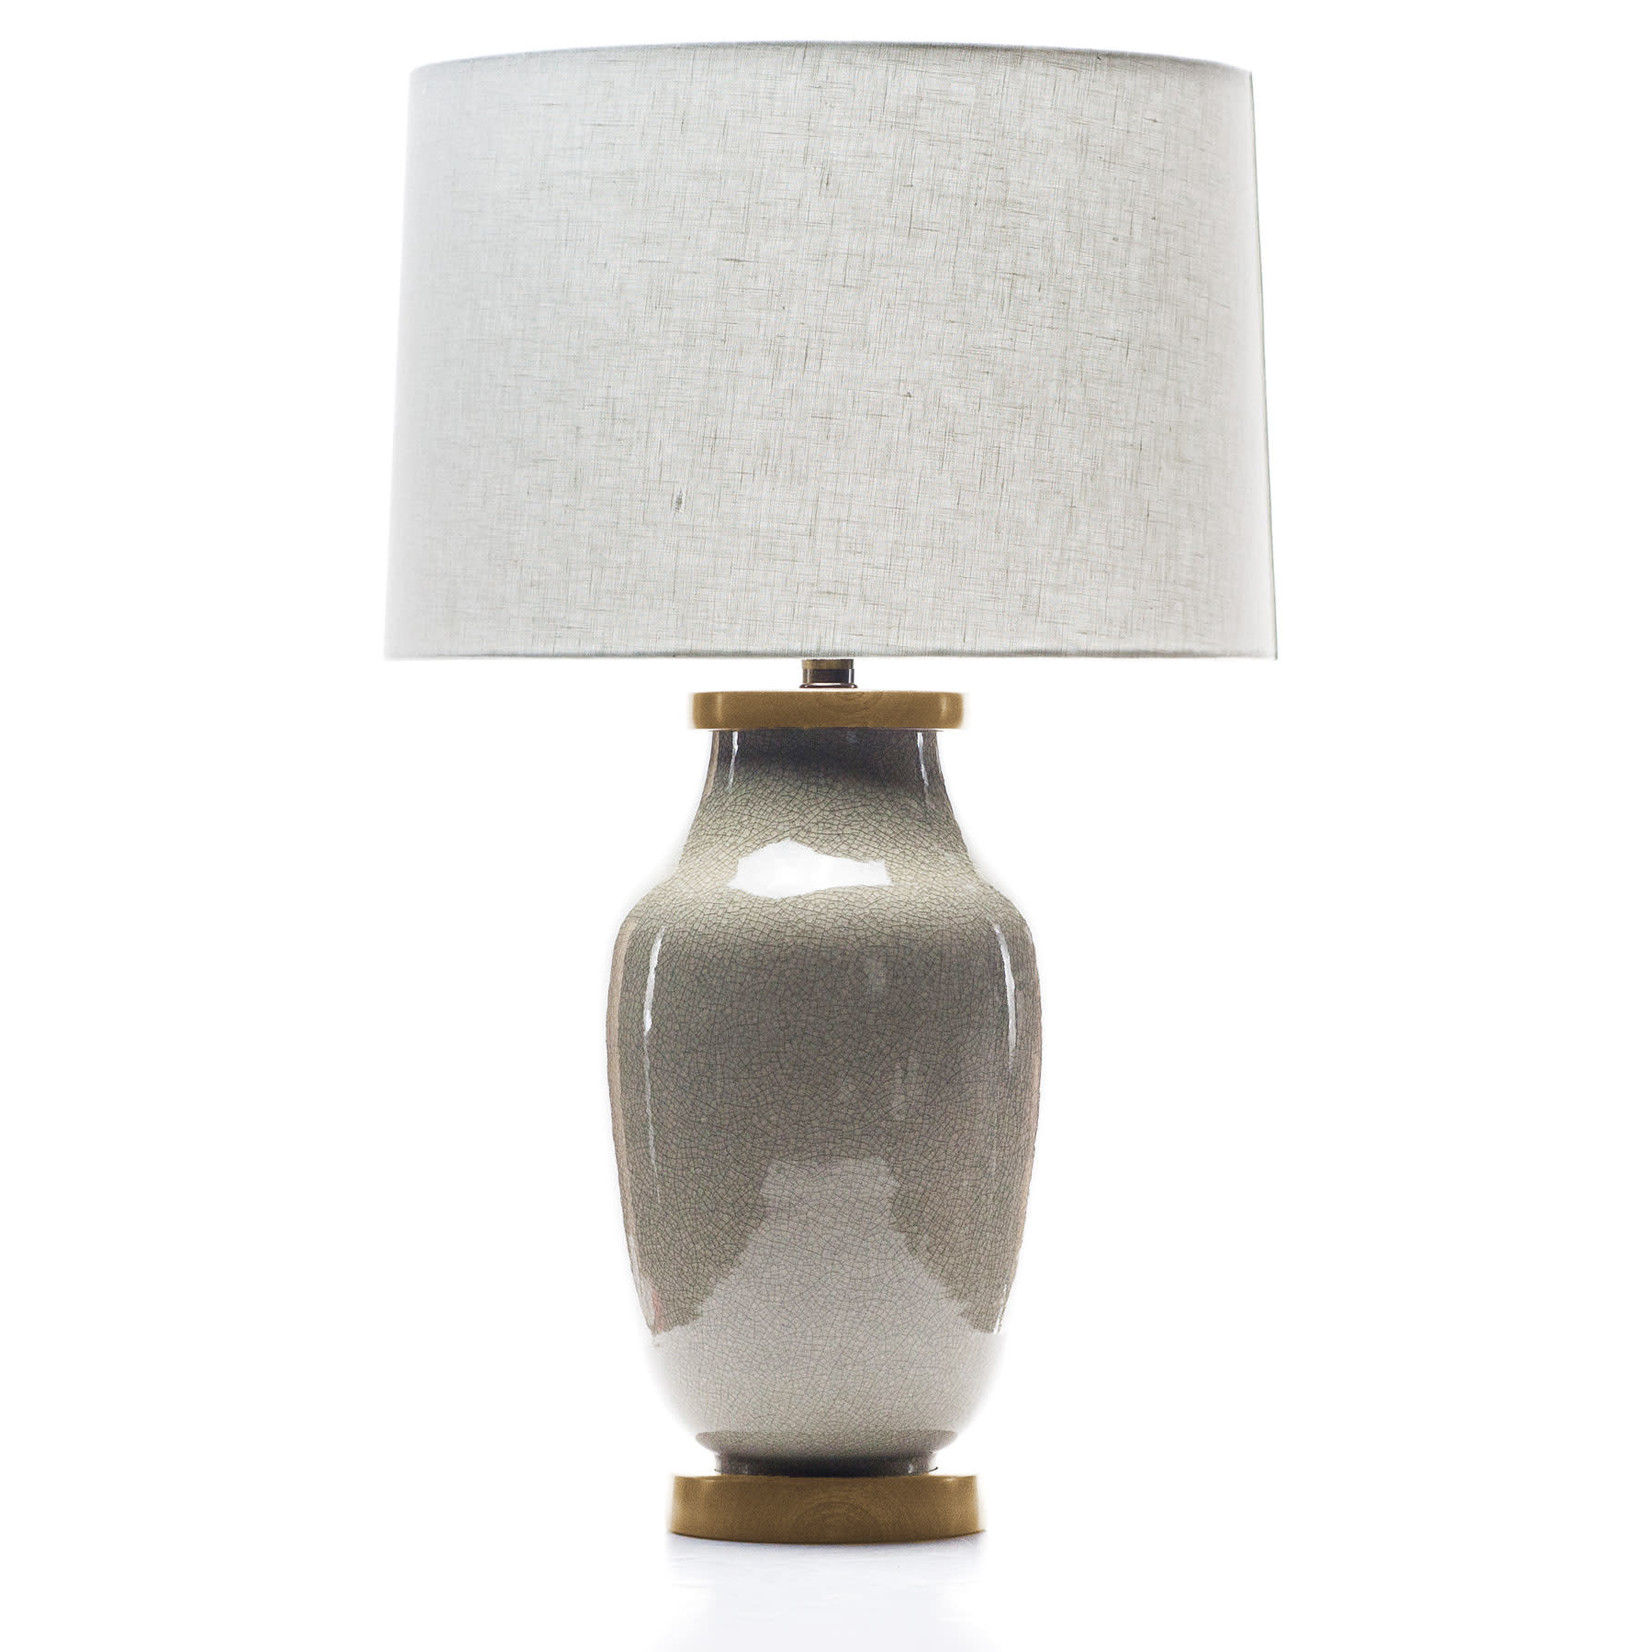 Lawrence & Scott Lagom Porcelain Lamp in Oyster Gray Crackle with White Oak Base